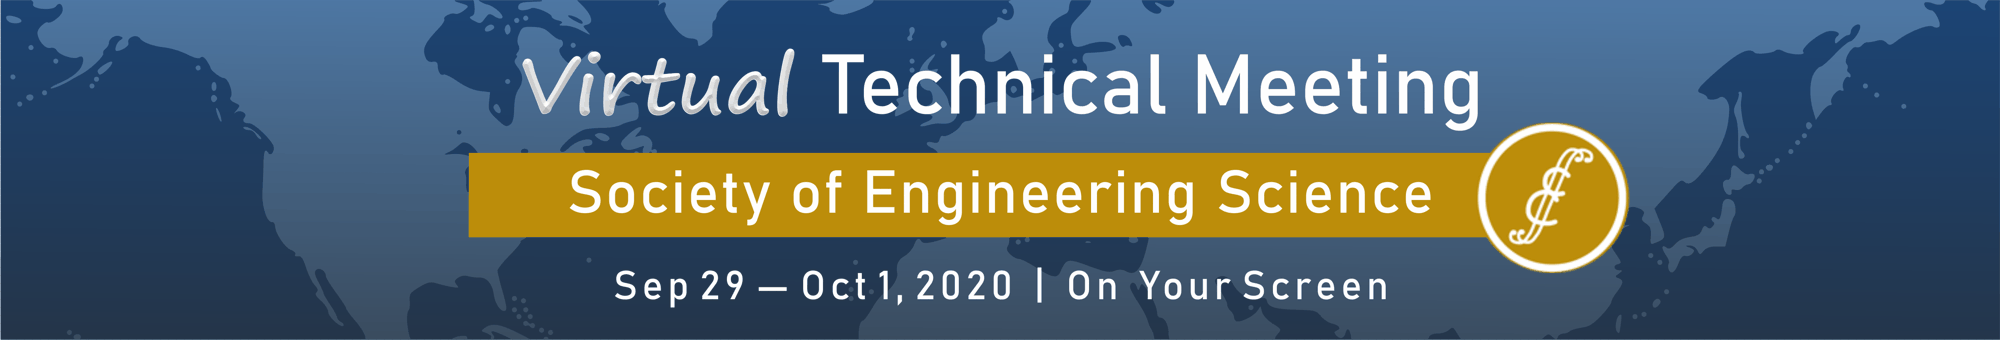 The banner to welcome you to Virtual Technical Meeting of the Society of Engineering Science 2020